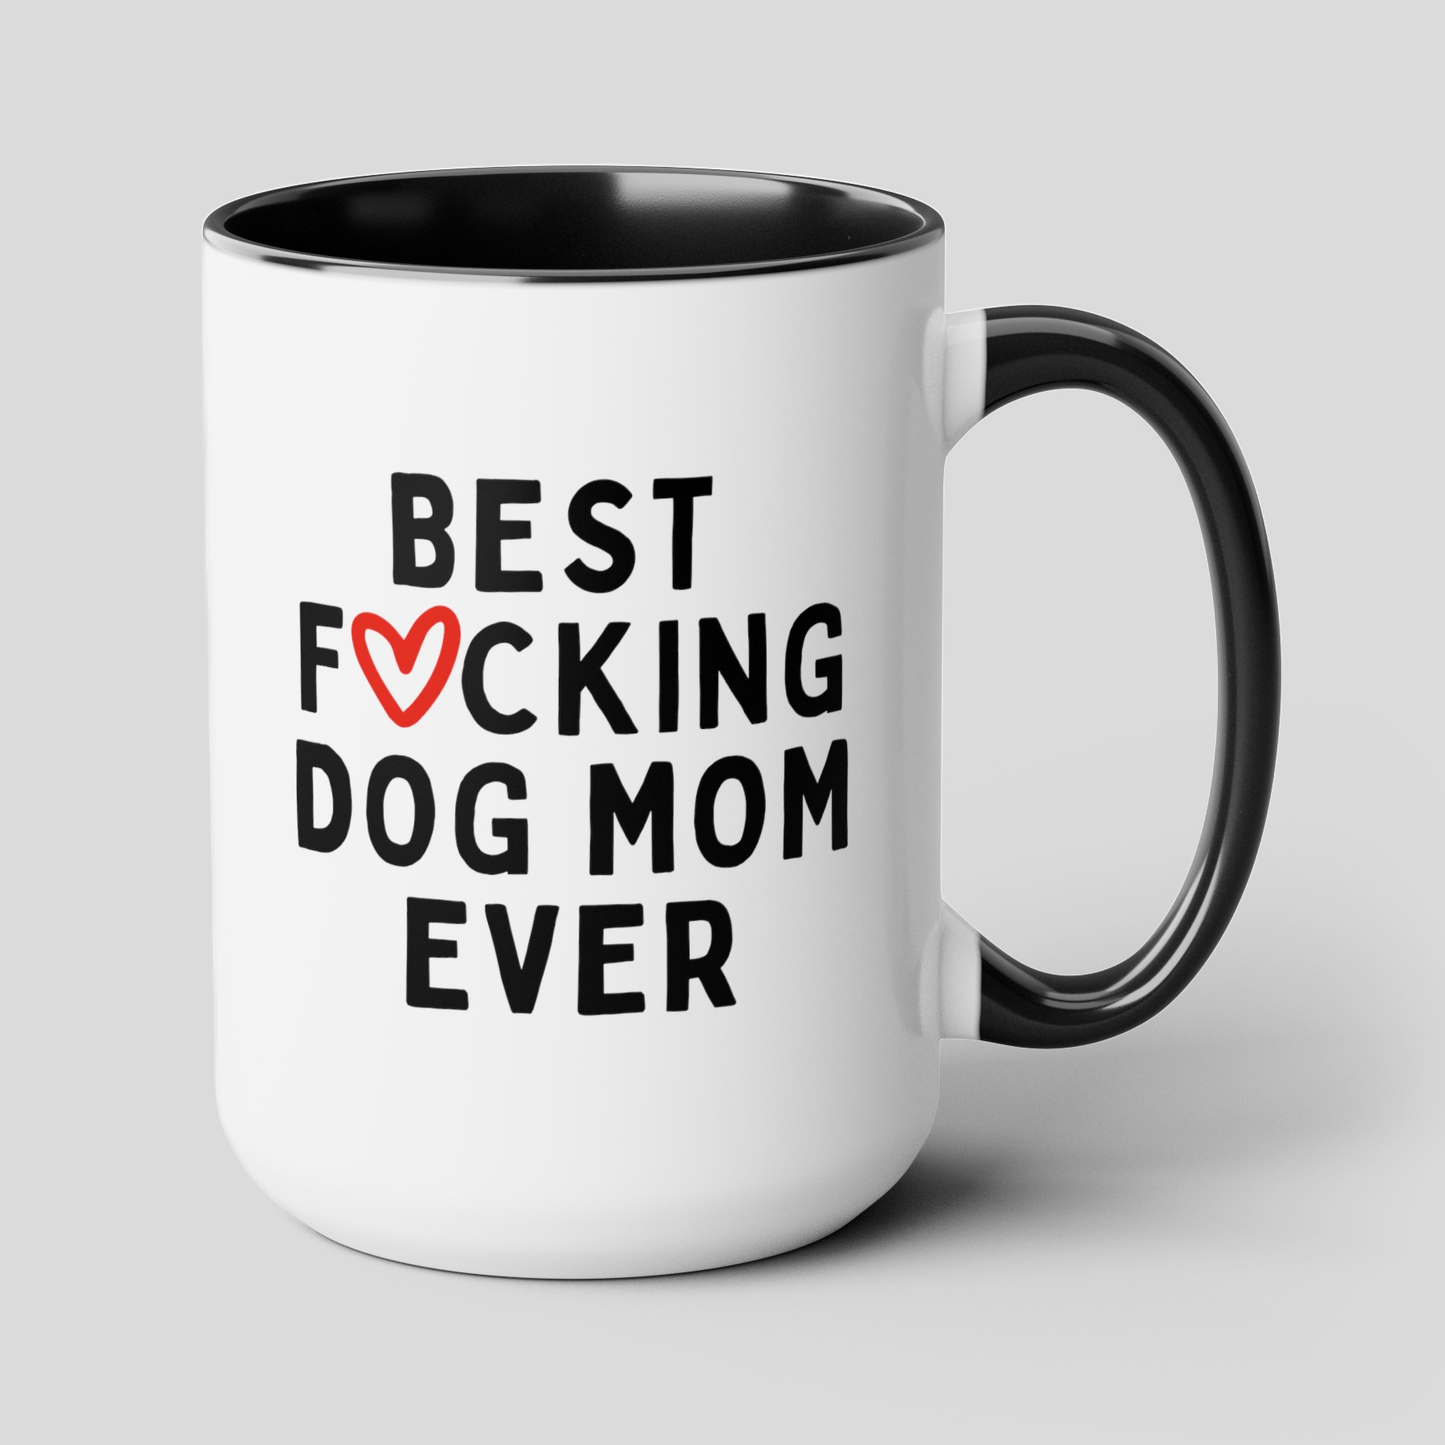 Best Fucking Dog Mom Ever 15oz white with black accent funny large coffee mug gift for furmom pet lover owner cuss word heart waveywares wavey wares wavywares wavy wares cover